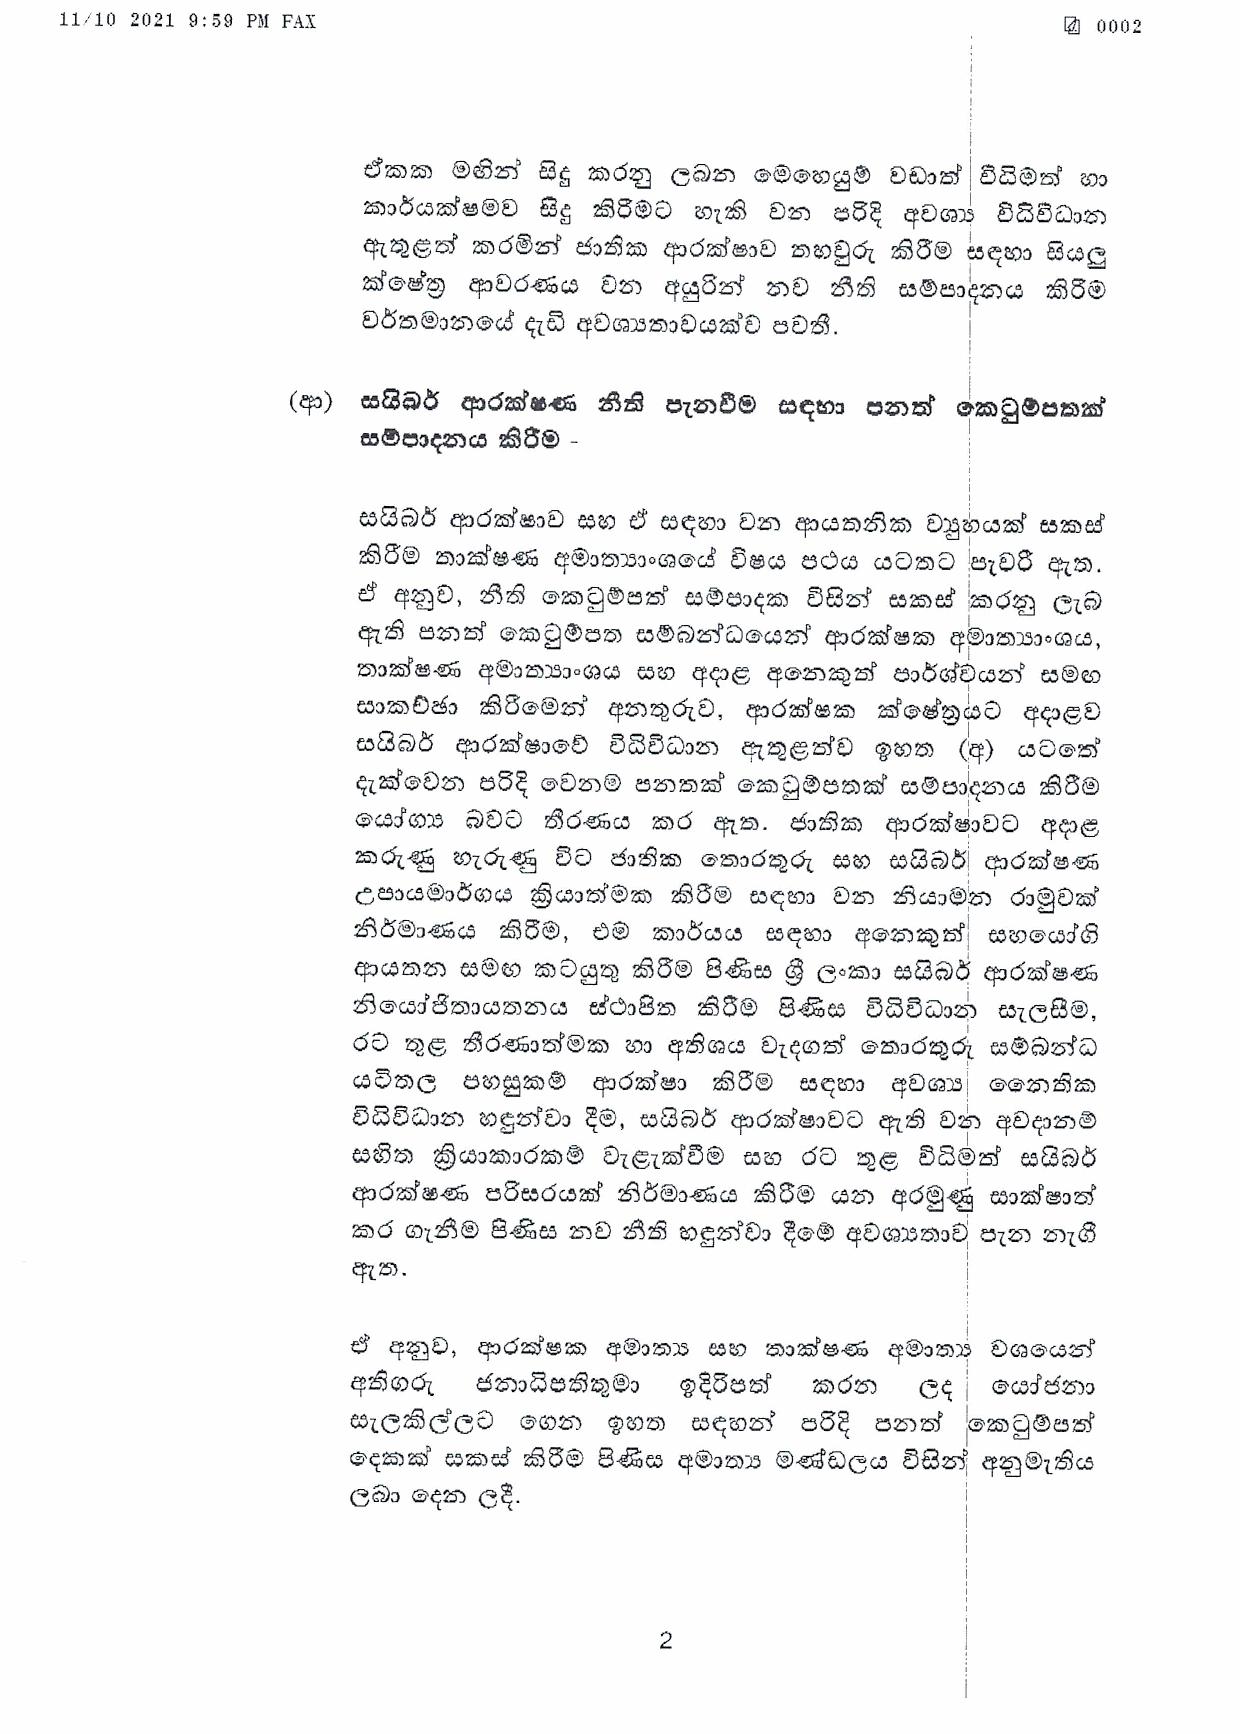 Cabinet Decisions on 11.10.2021 page 002